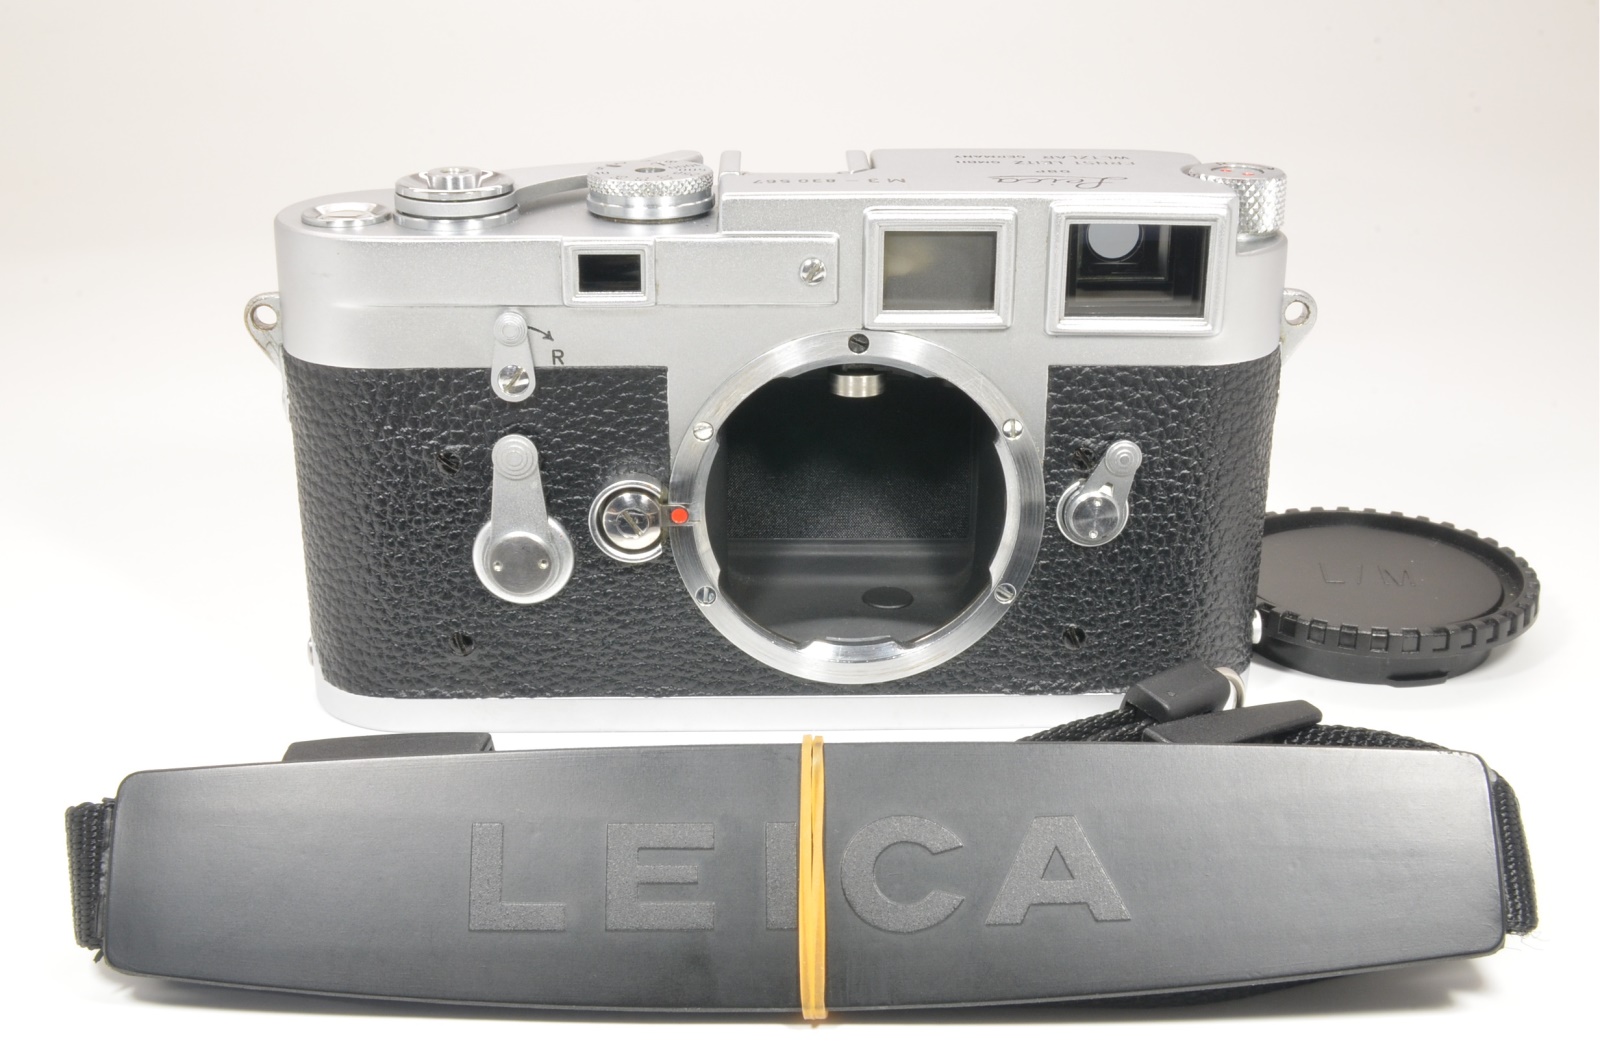 leica m3 double stroke s/n 830567 year 1956 with strap shooting tested